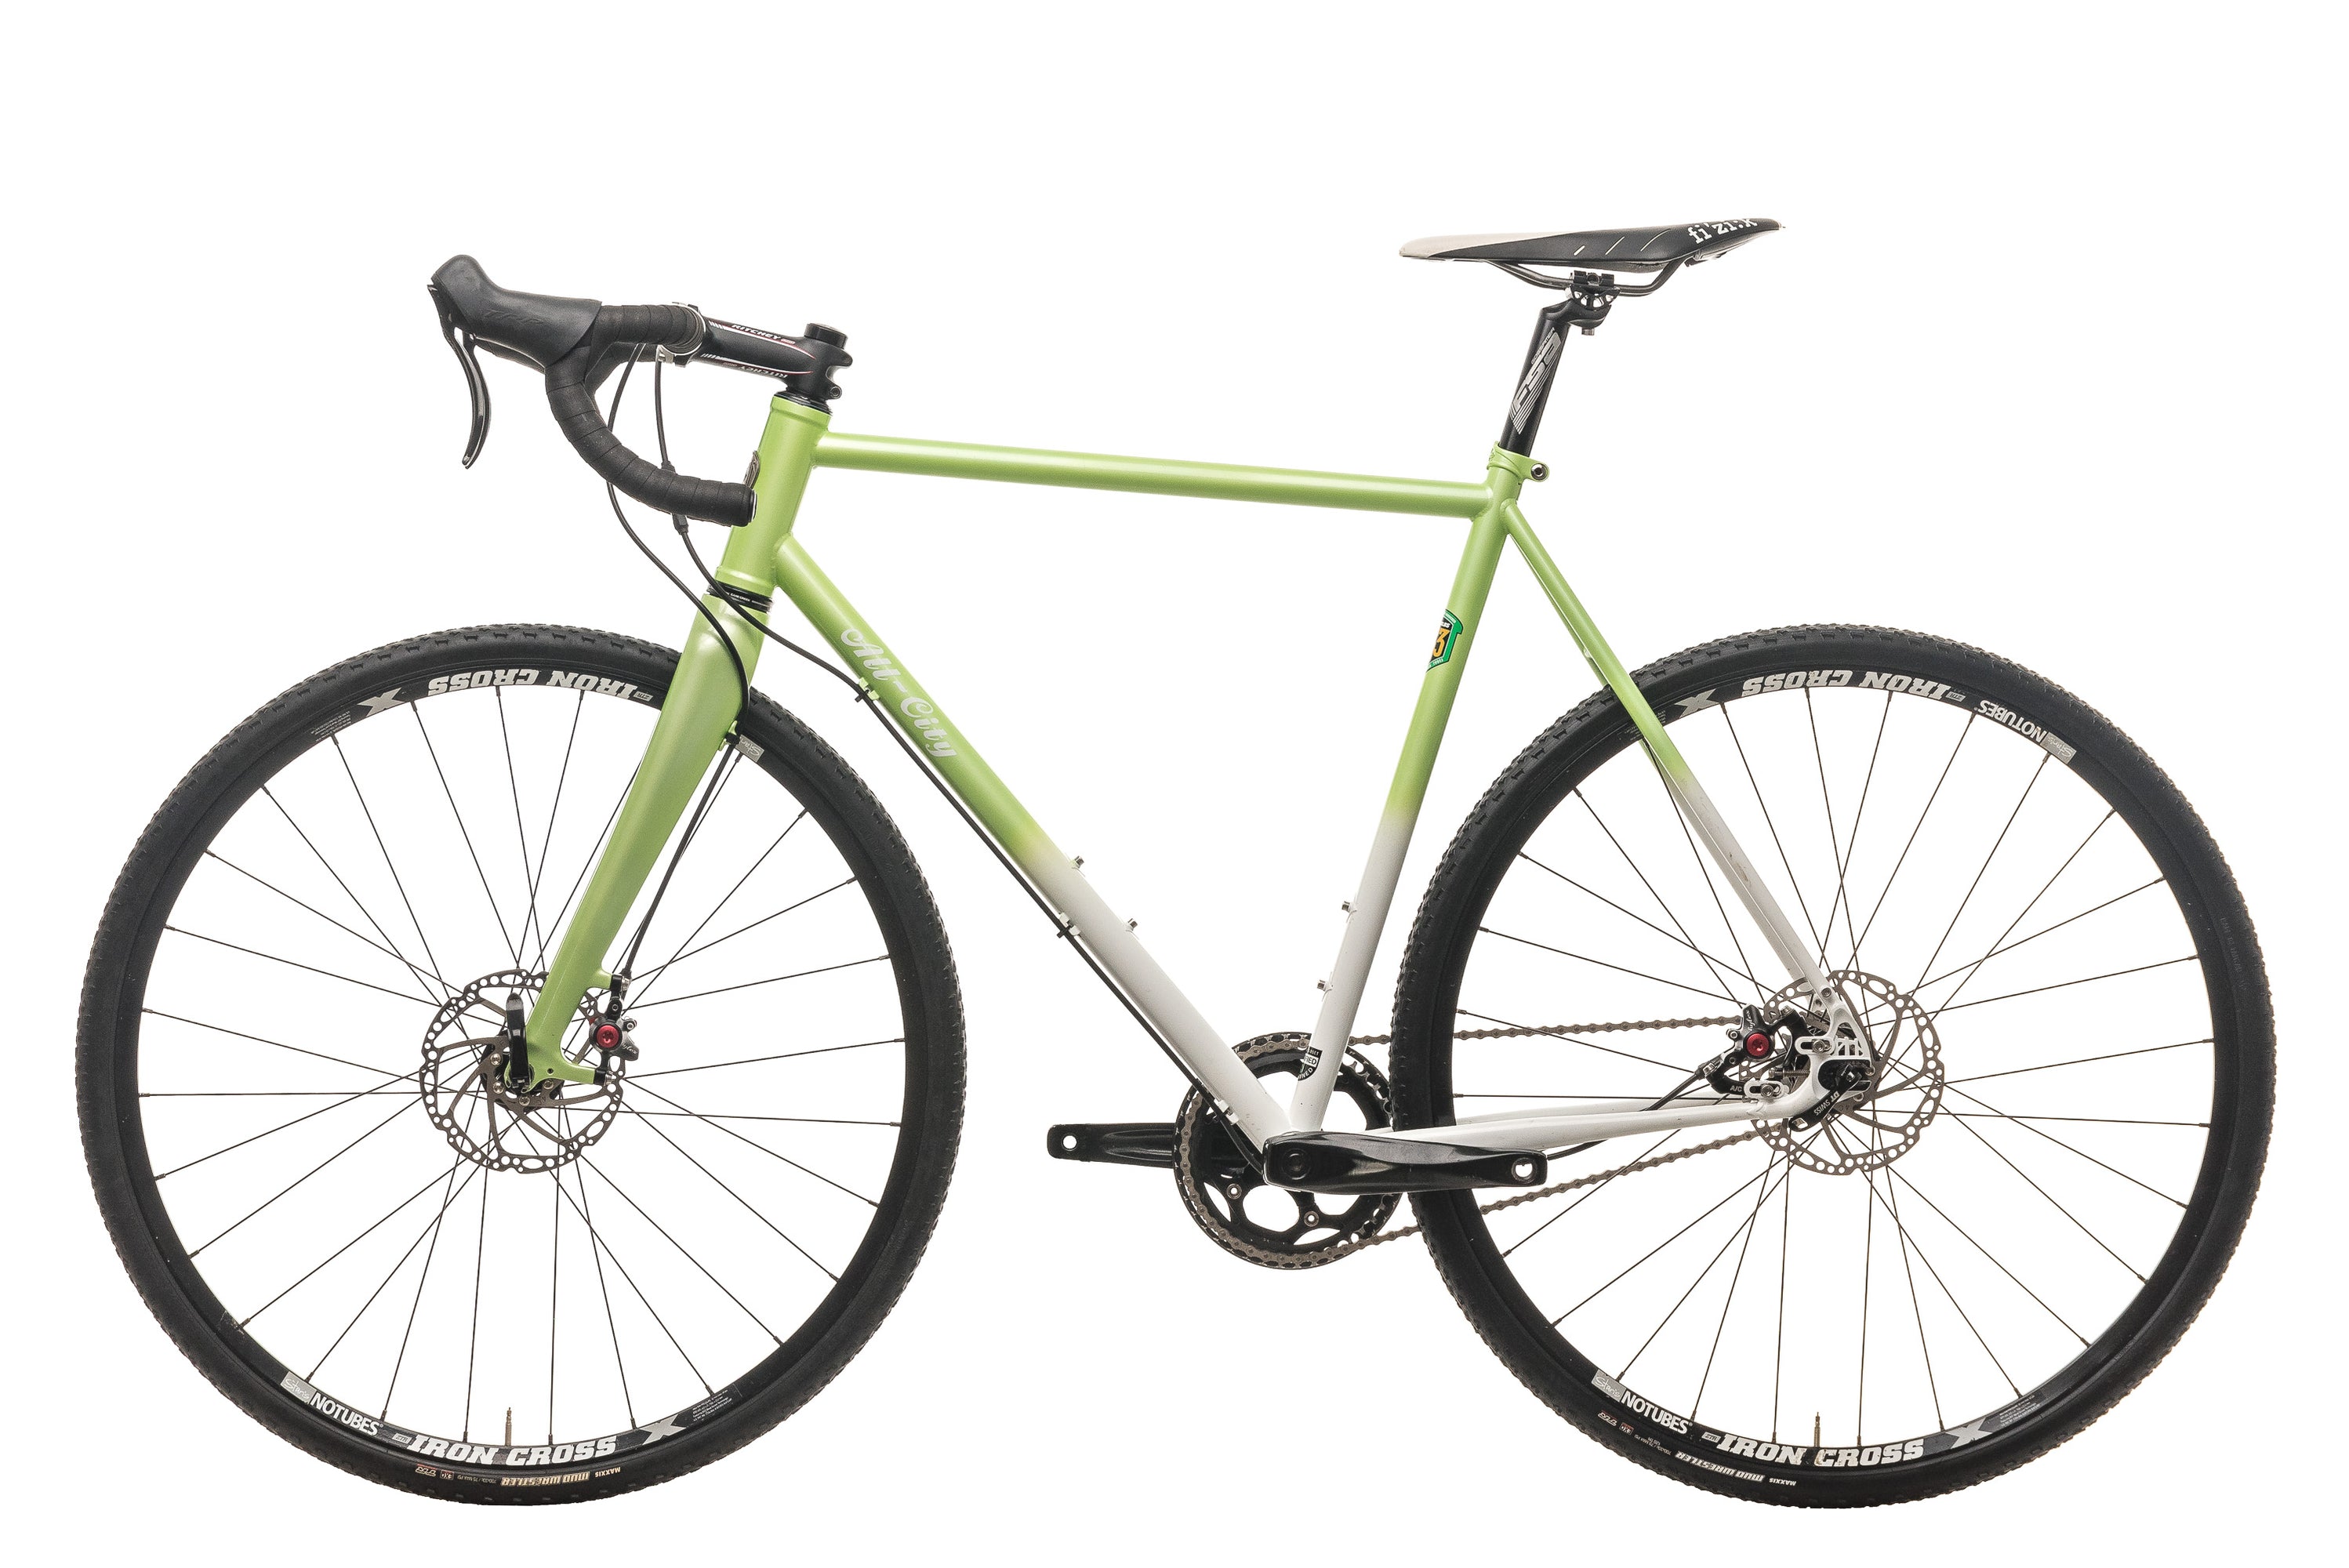 All-City Nature Boy Disc Cyclocross Bike - 2017, 55cm non-drive side